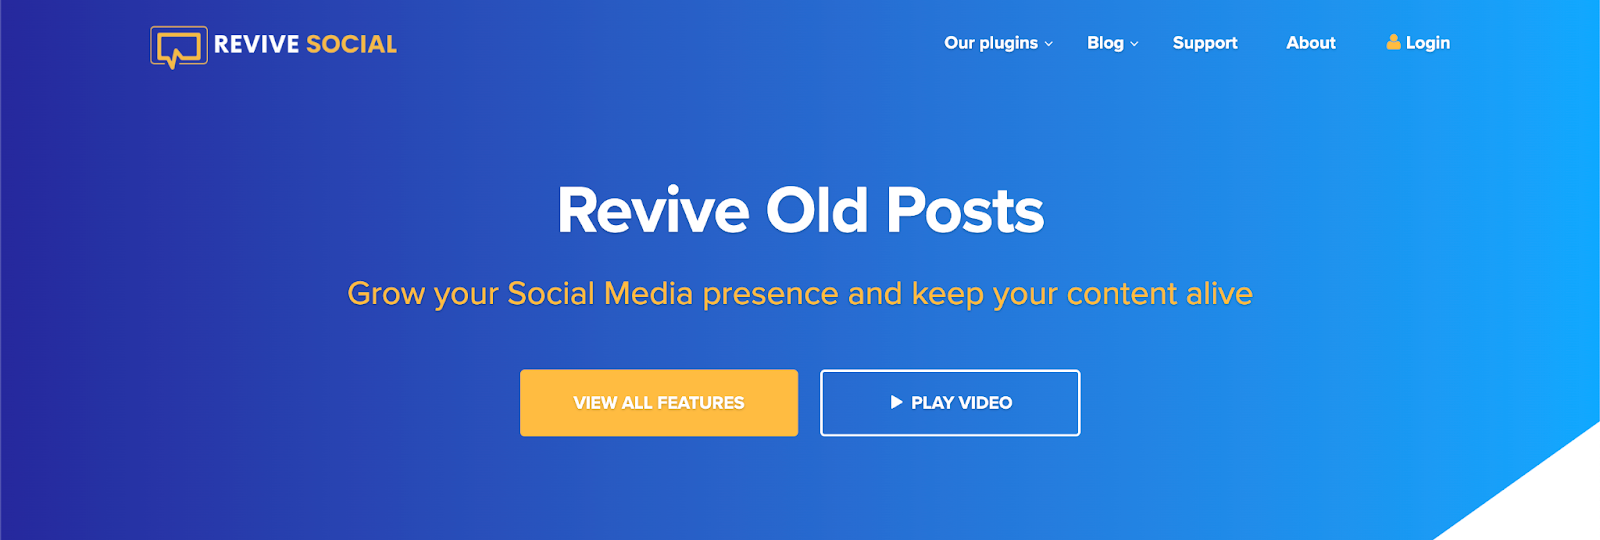 Auto post to facebook from wordpress plugin: revive old posts